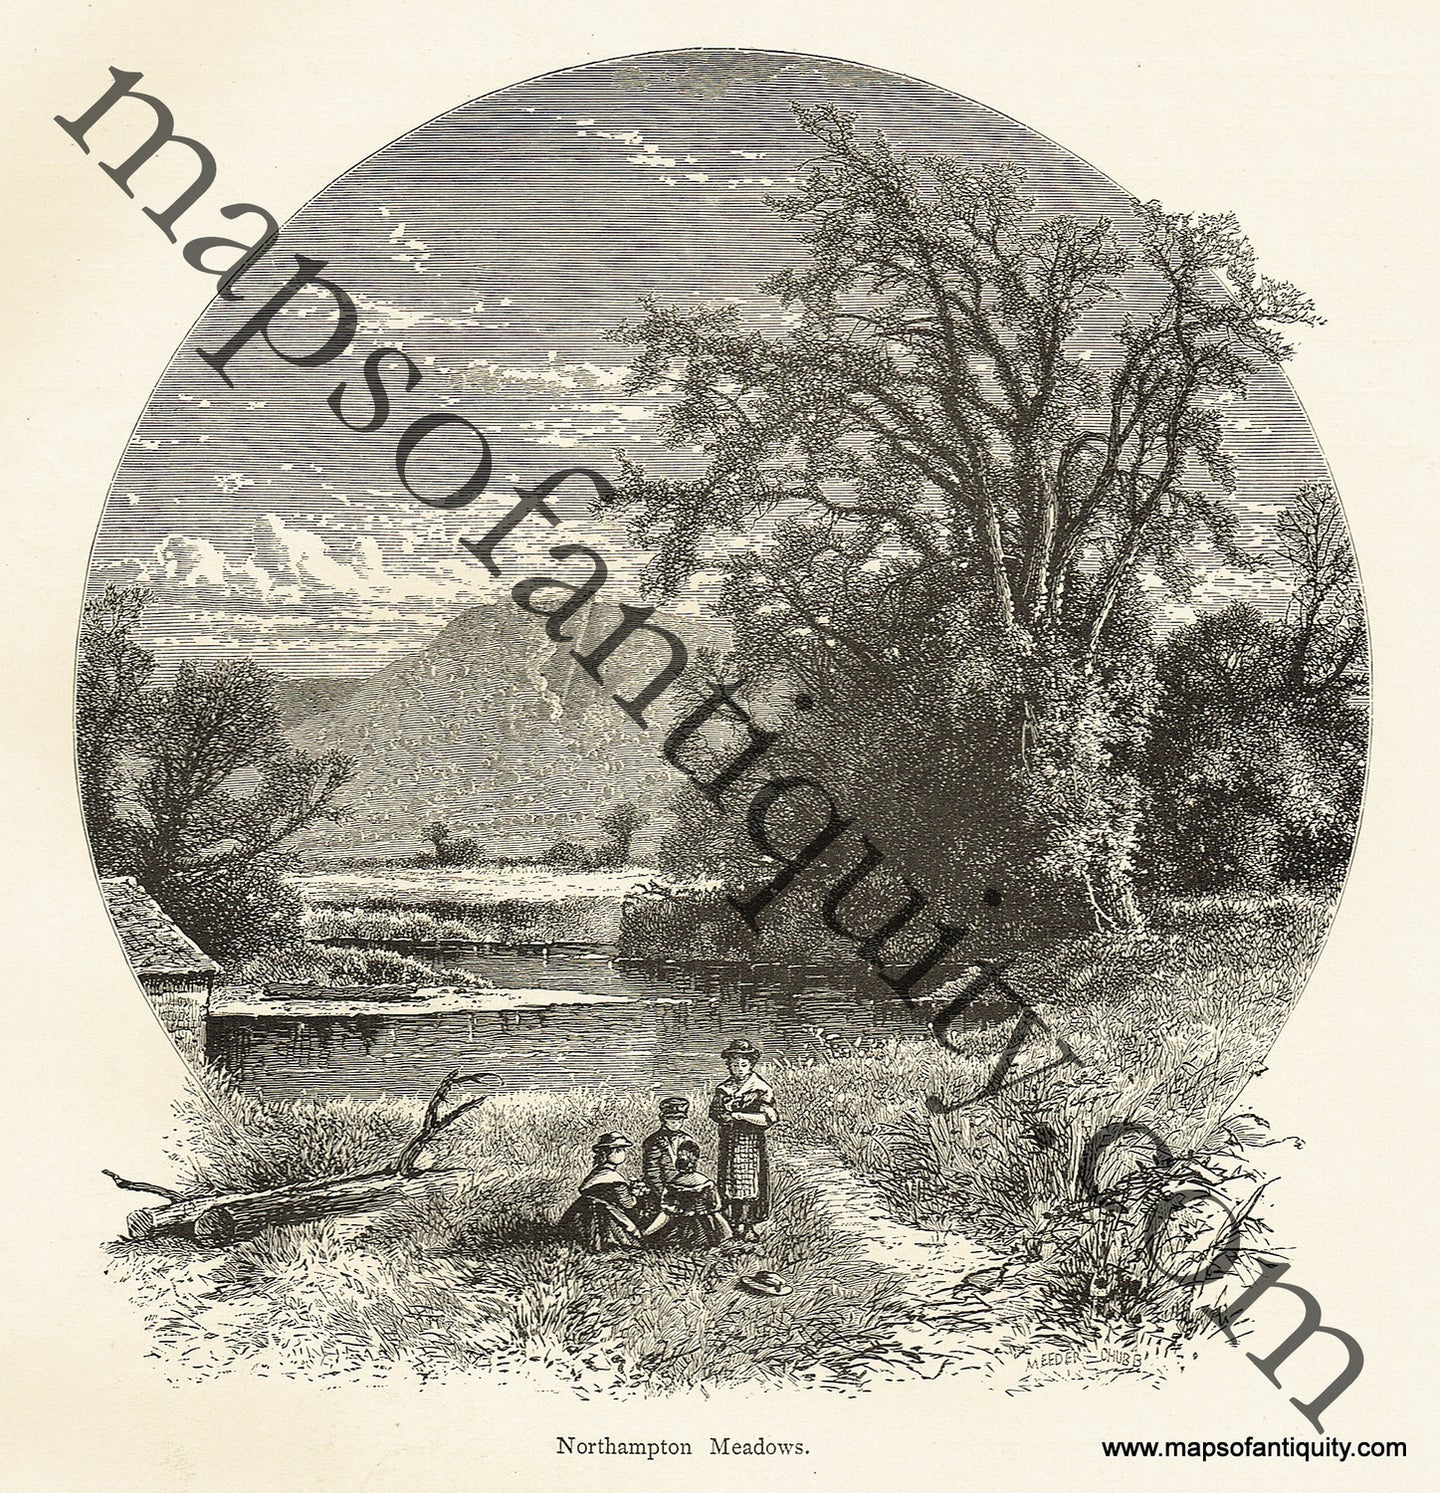 Antique-Black-and-White-Engraved-Illustration-Northampton-Meadows-Massachusetts-Hampshire-County-1872-Picturesque-America-Maps-Of-Antiquity